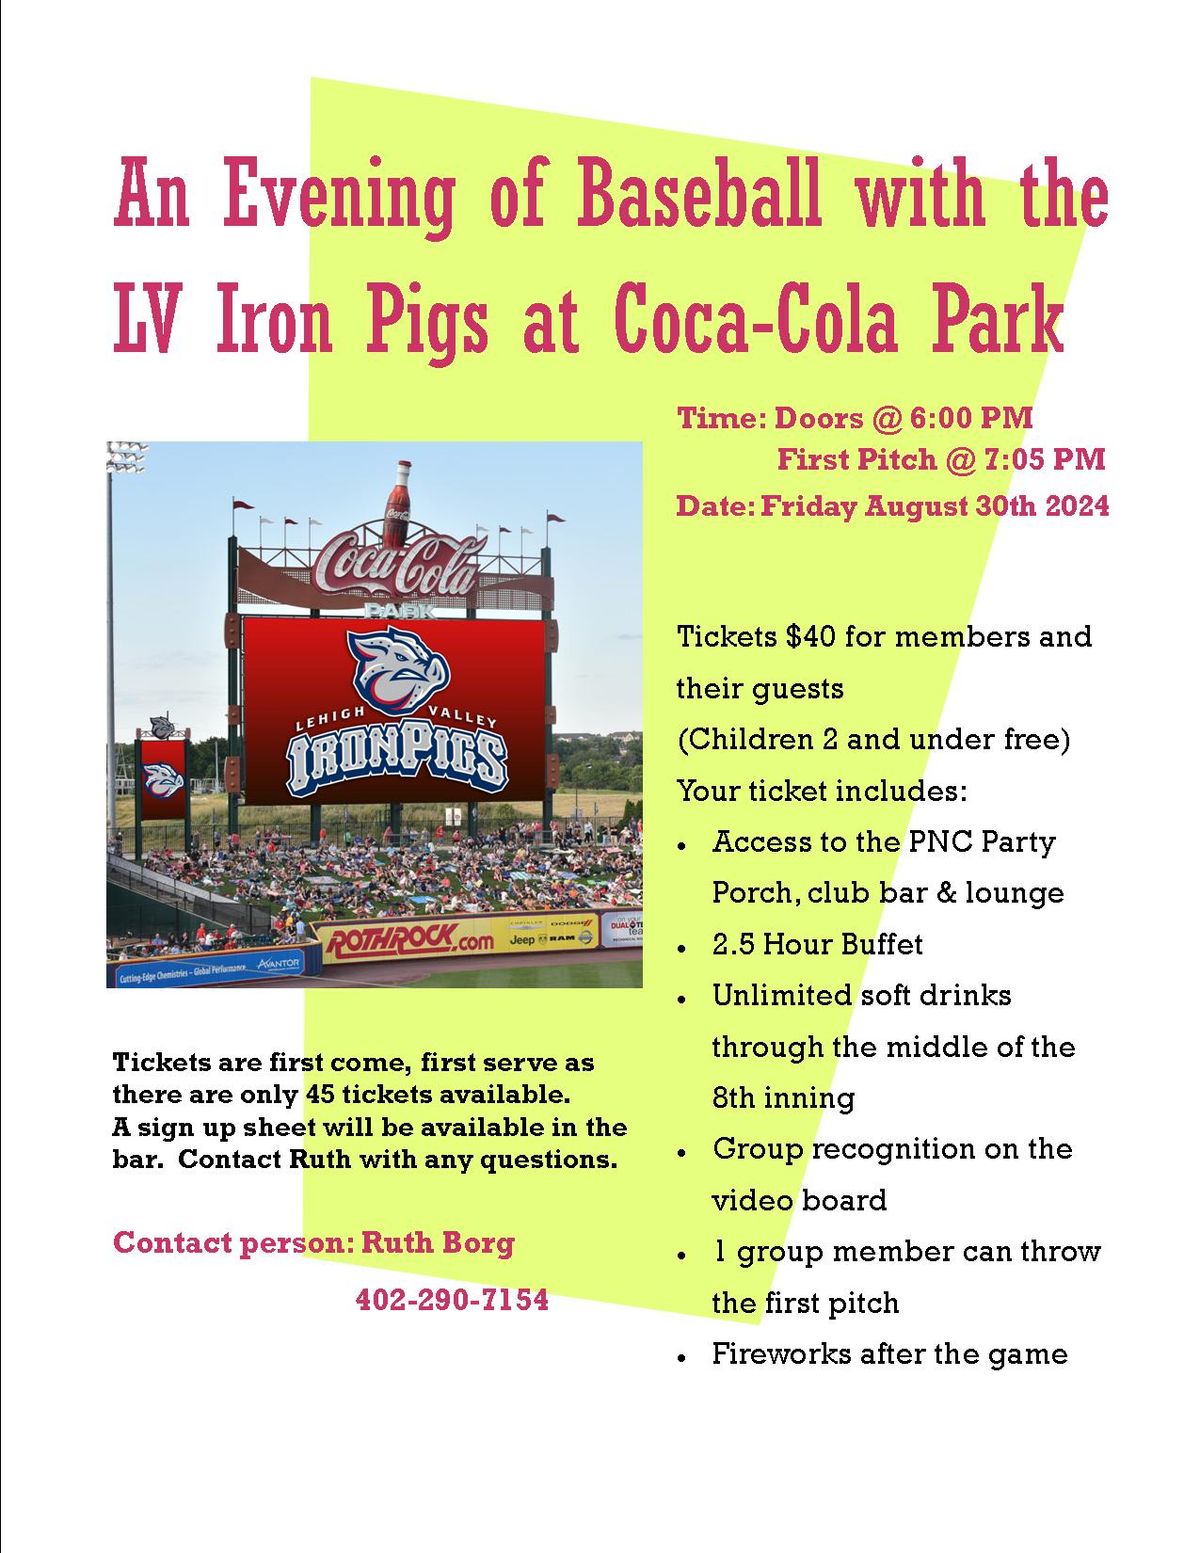 An Evening of Baseball with the LV Iron Pigs at Coca-Cola Park